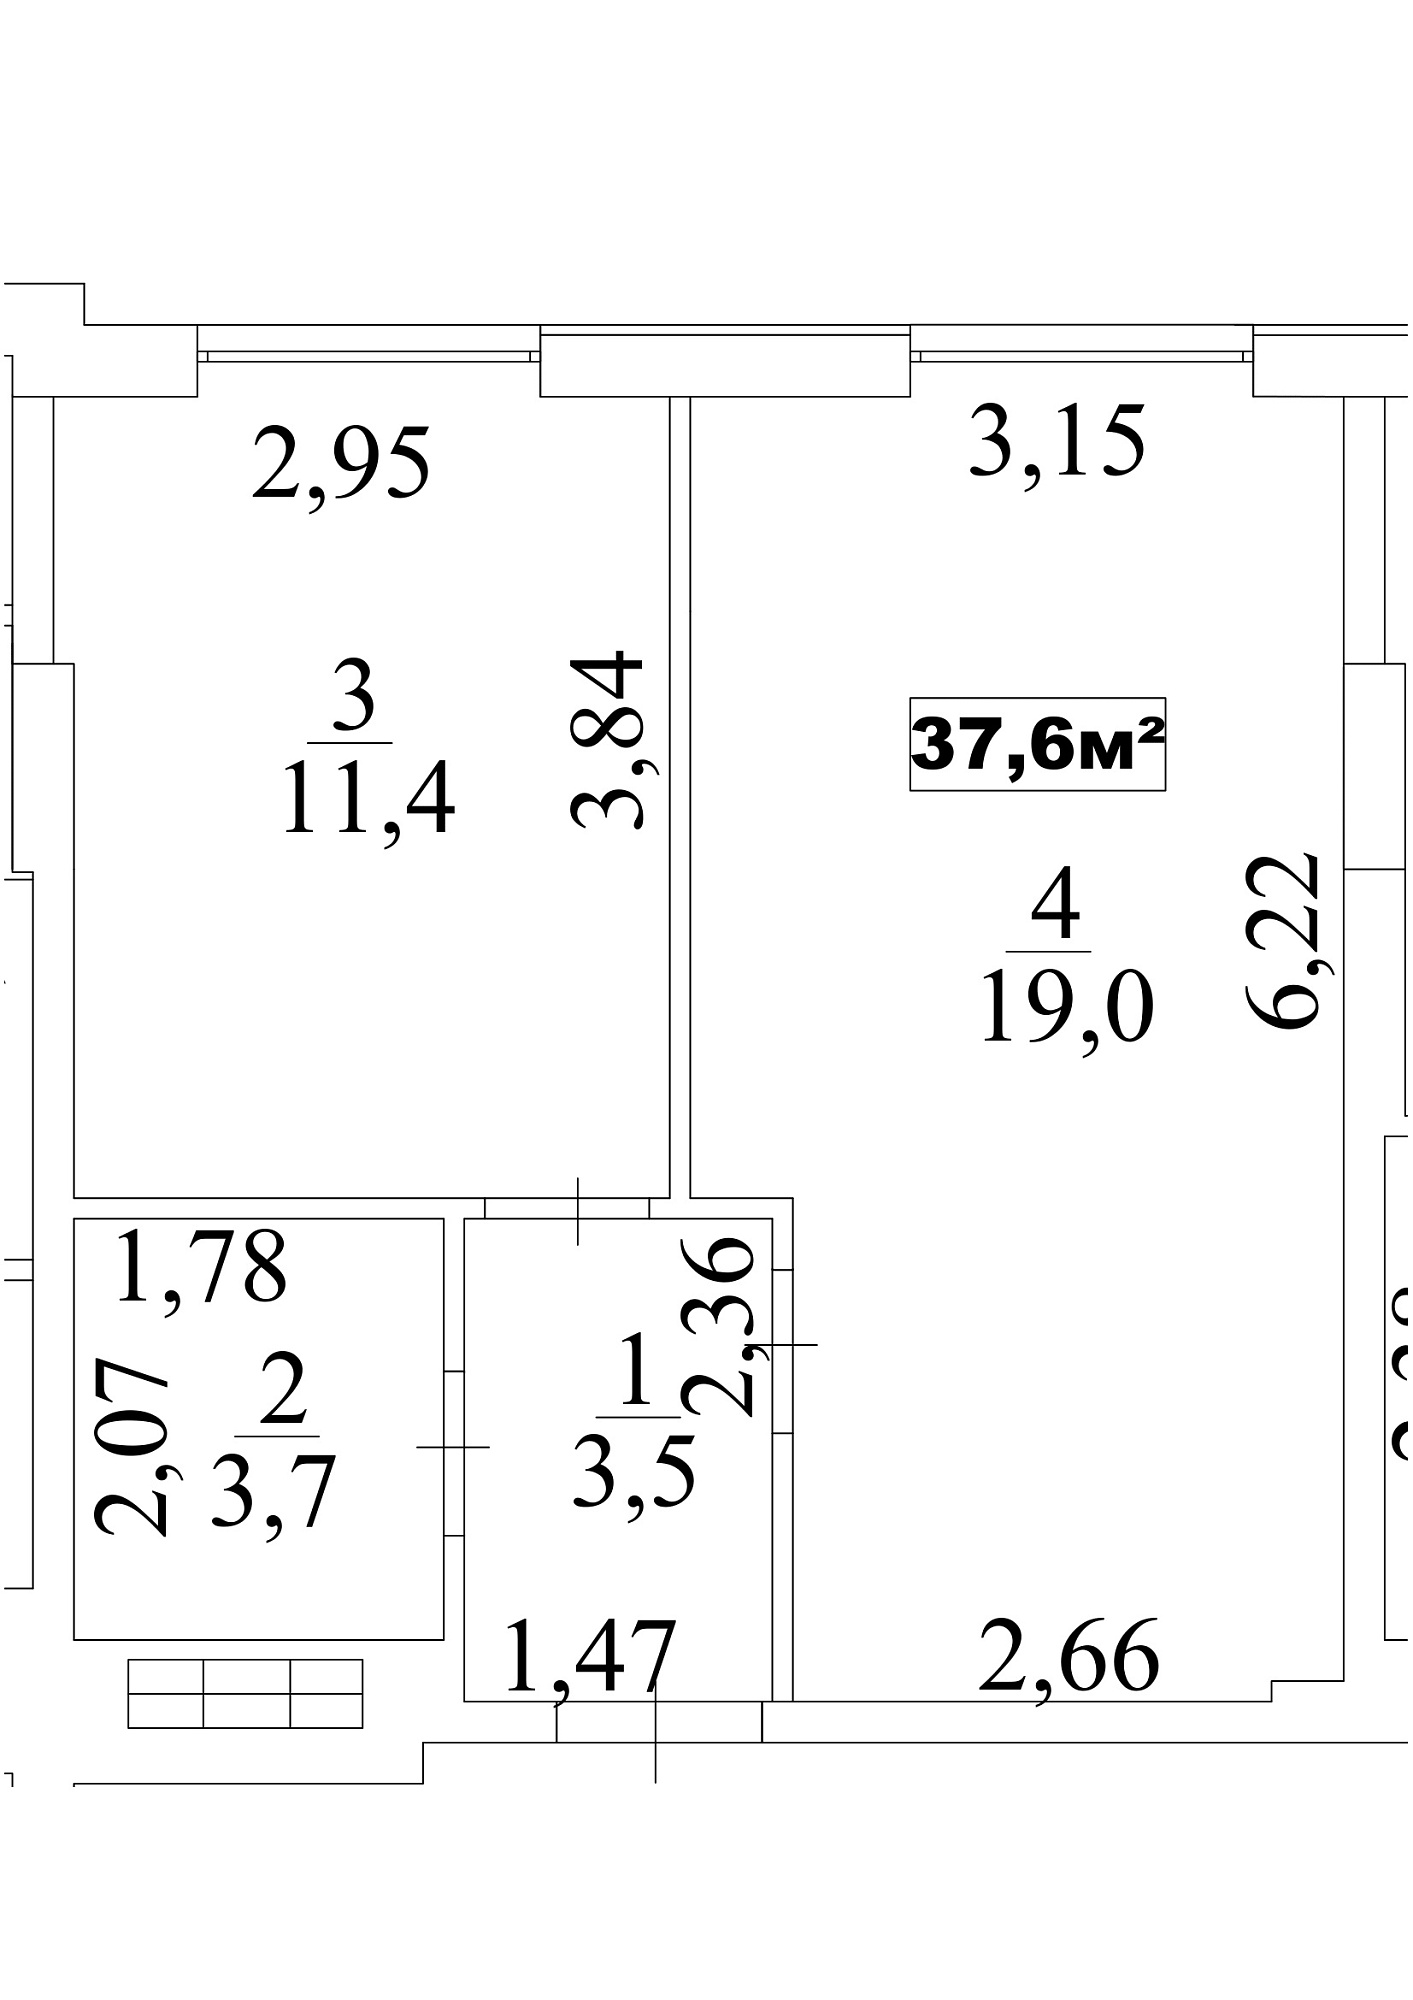 Planning 1-rm flats area 37.6m2, AB-10-05/00042.